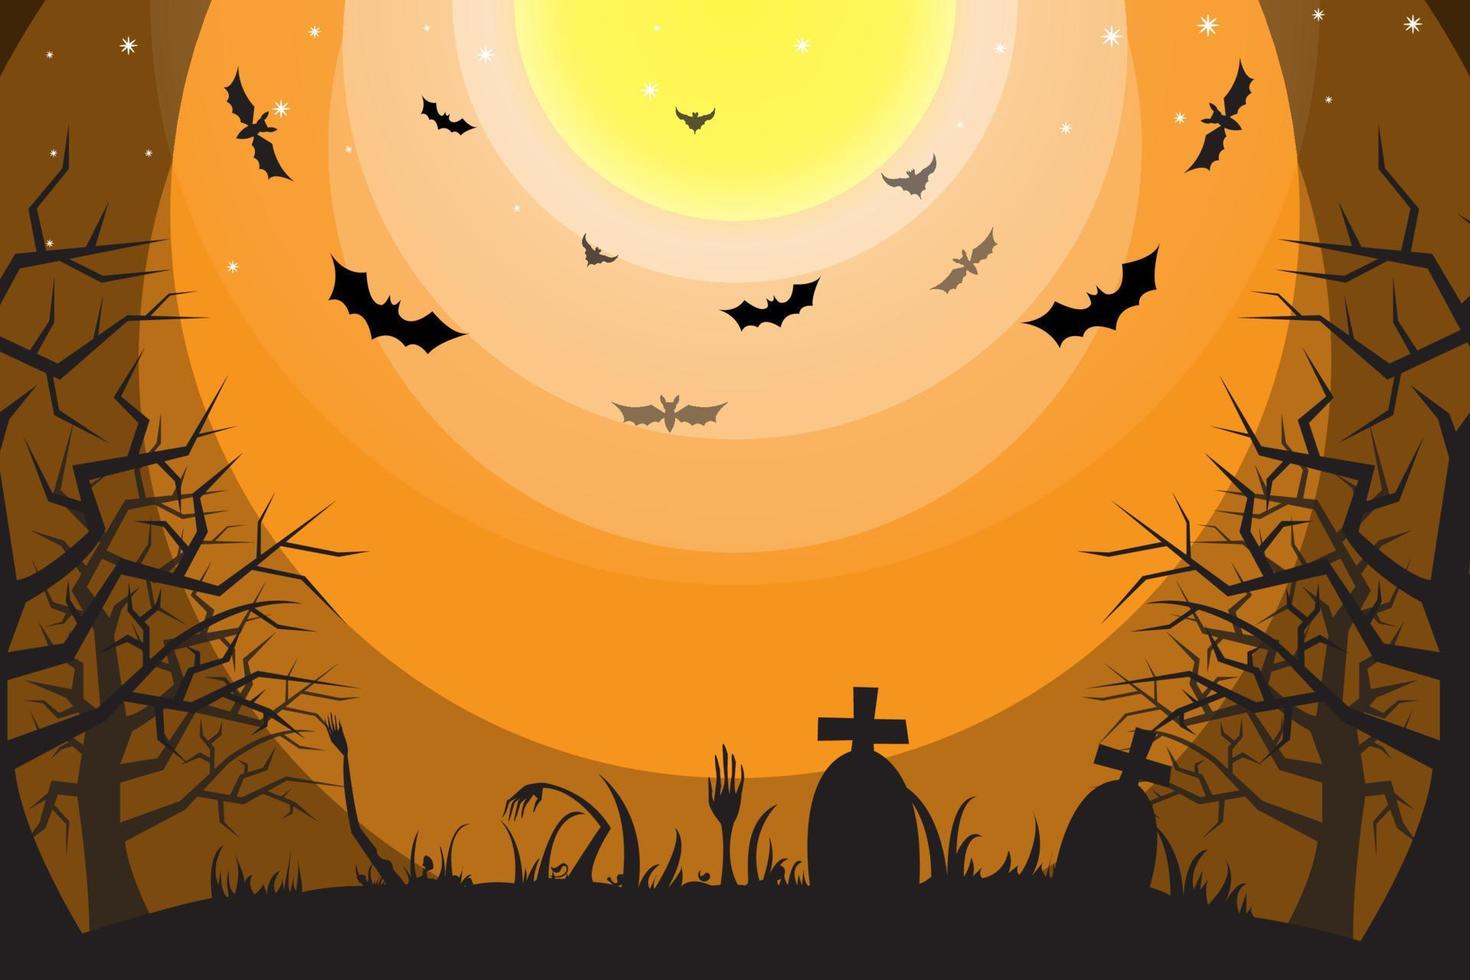 Halloween celebration with various characters, full moon, devil's house, bats and night vector